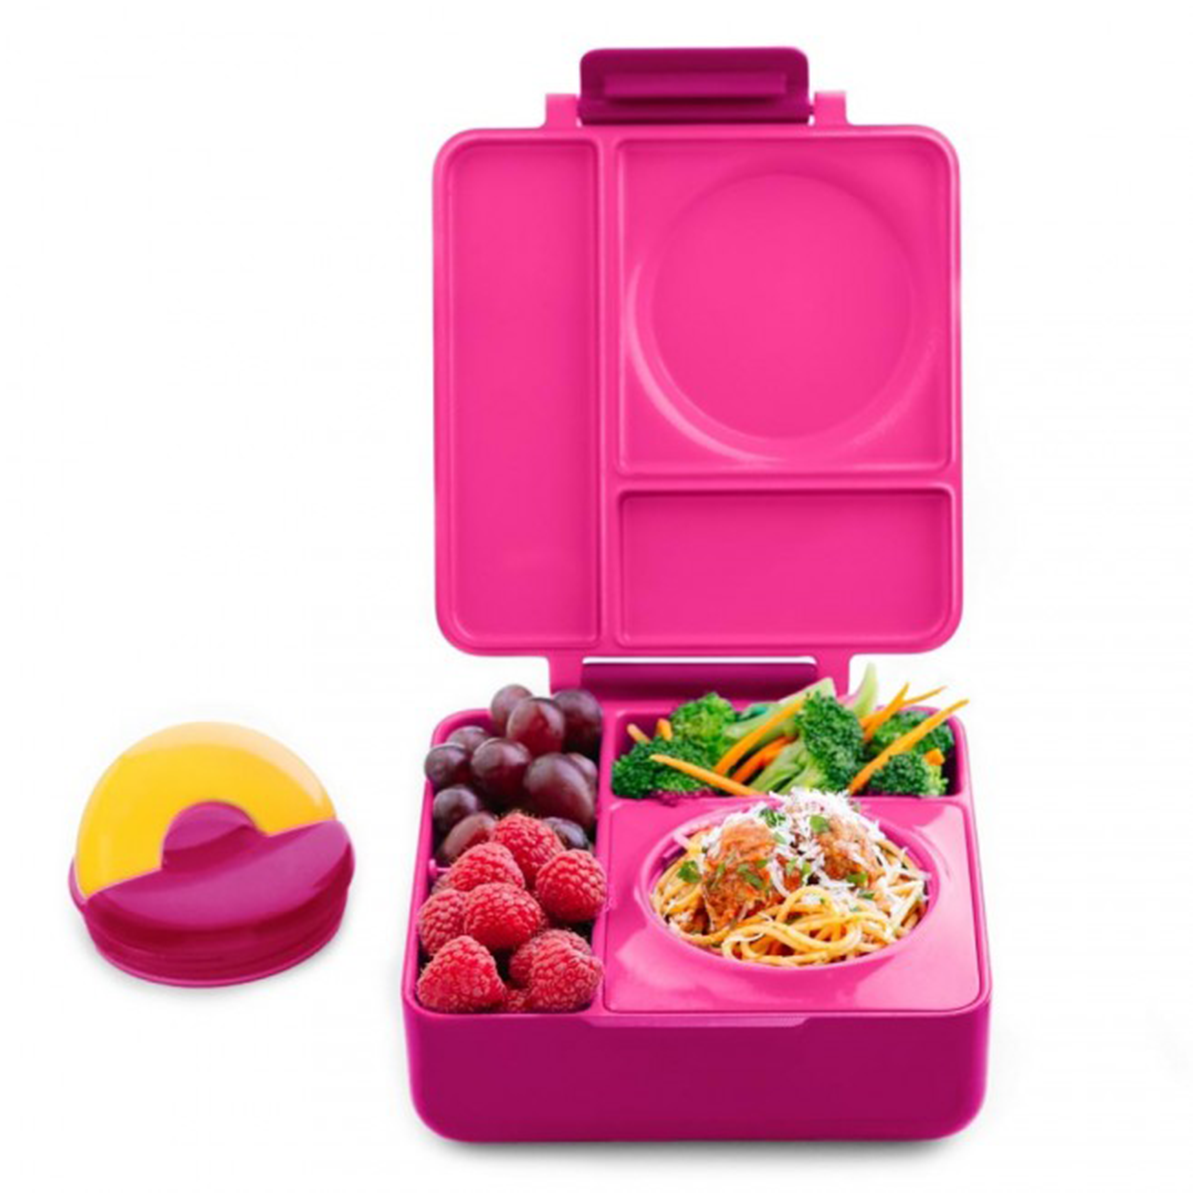 OmieBox Kids Bento Lunch Box with Insulated Thermos - Omielife - Pink